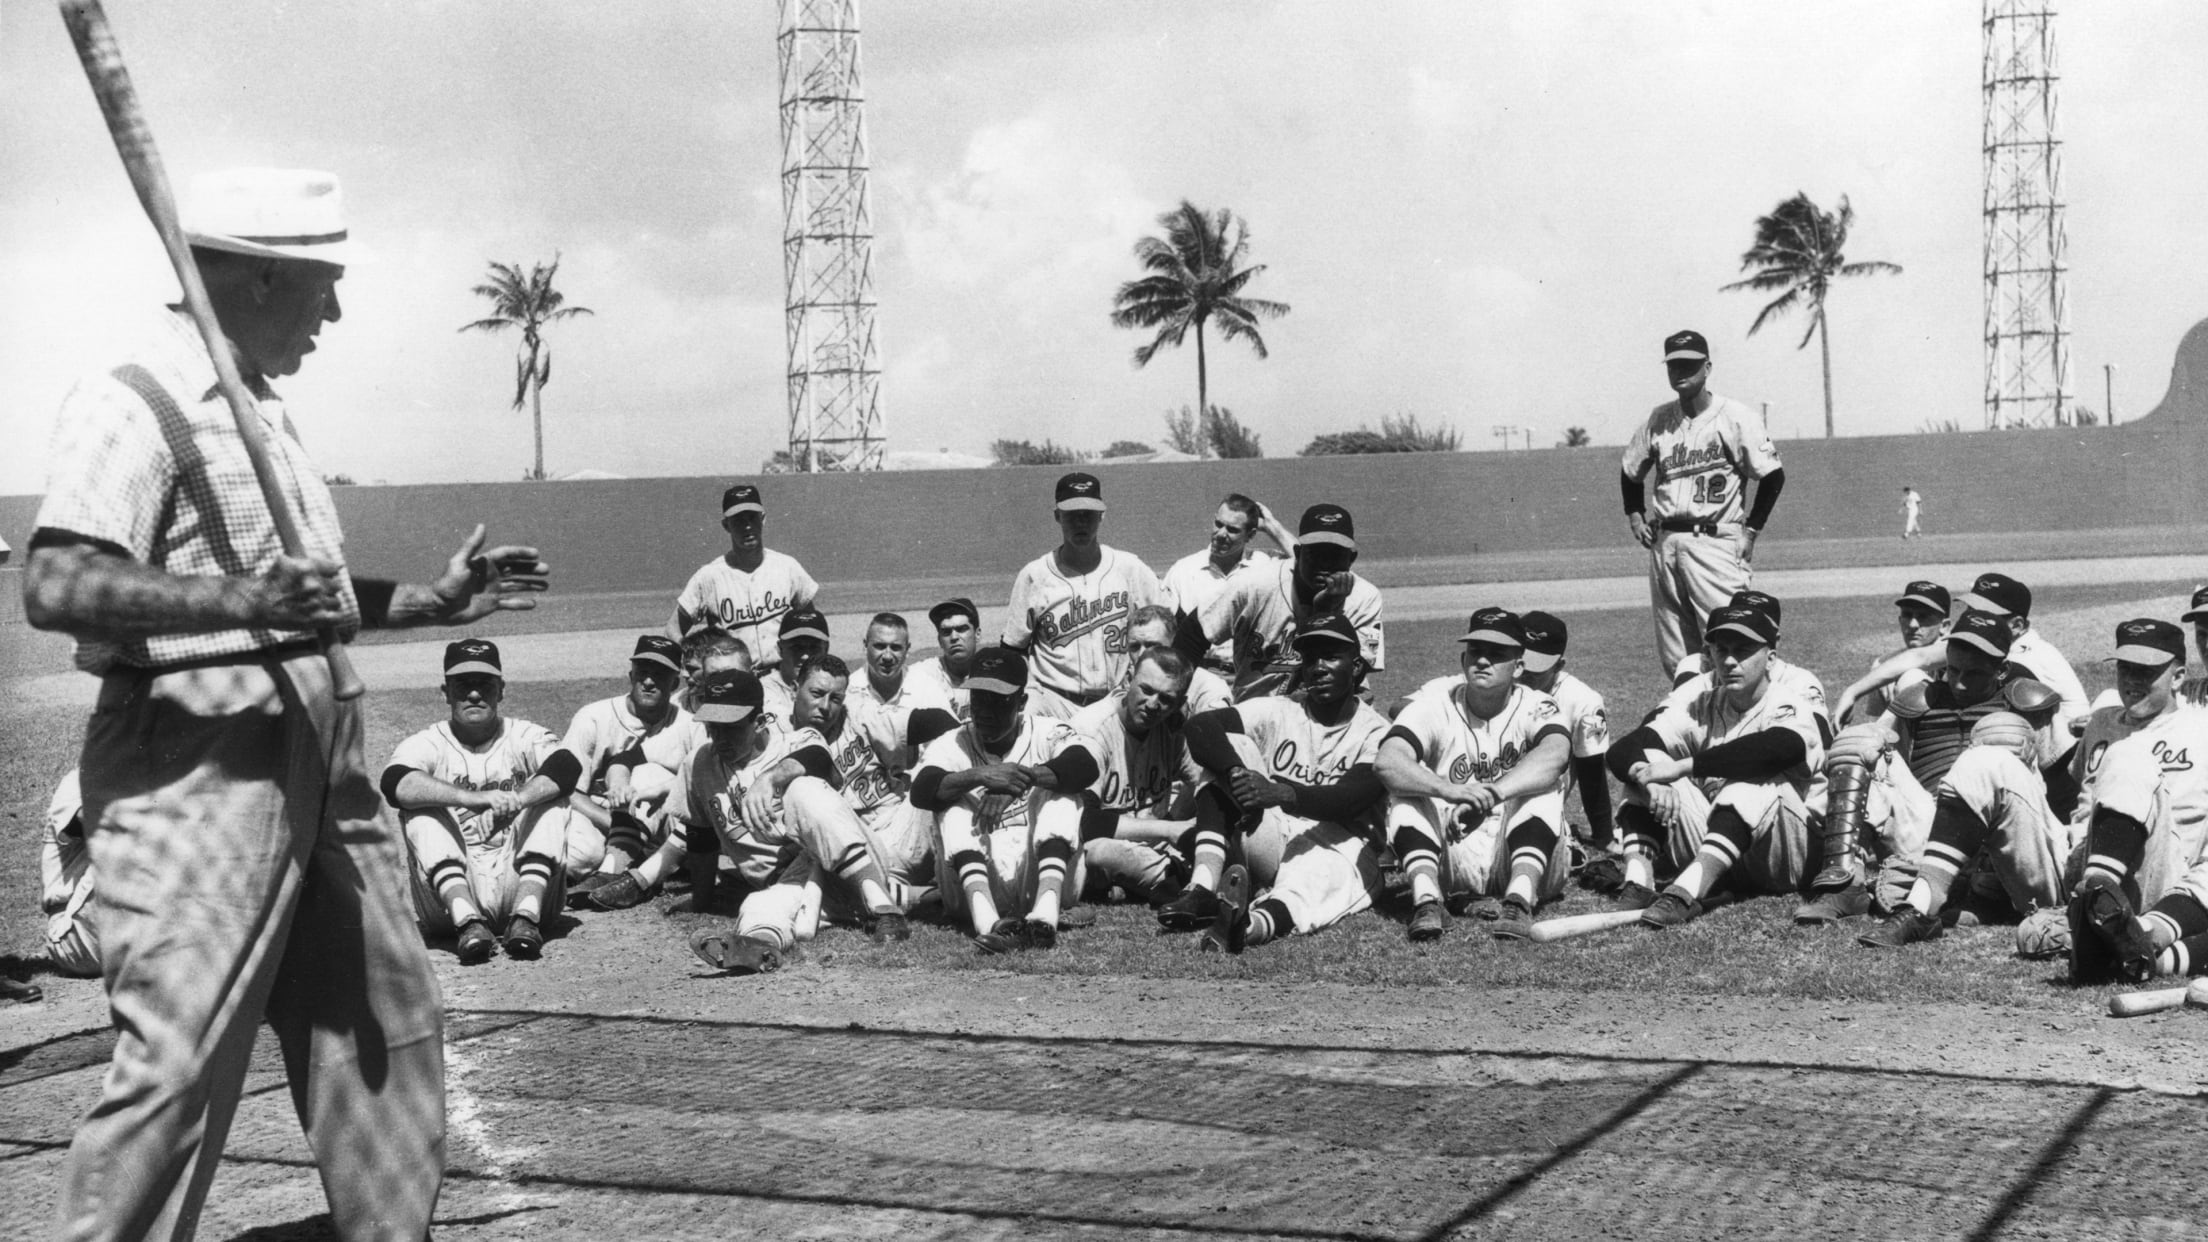 In 1954, Orioles found their oasis during spring training